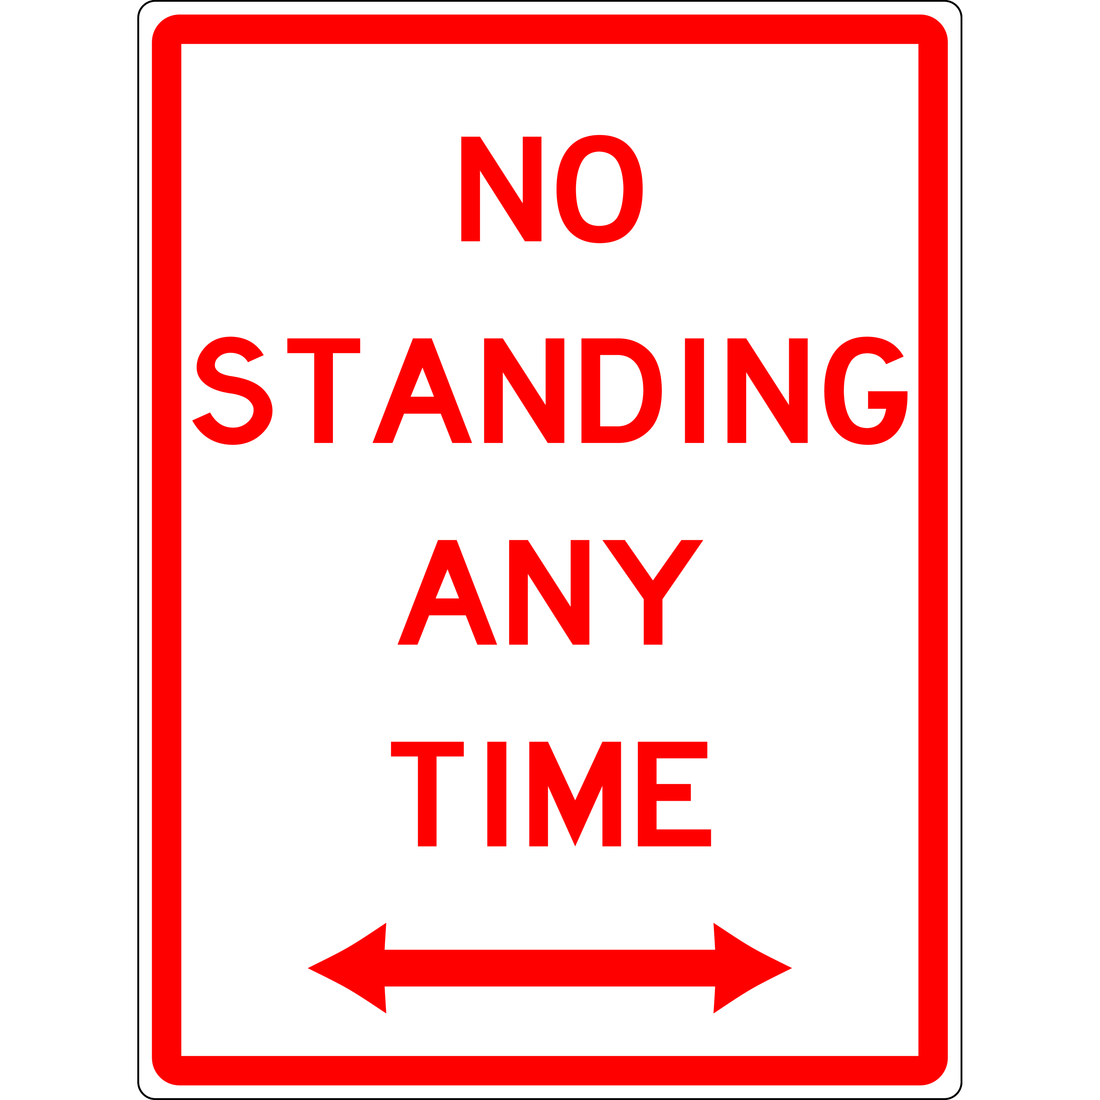 CARPARK-NO-STANDING-AT-ANY-TIME-_DOUBLE-ARROW_